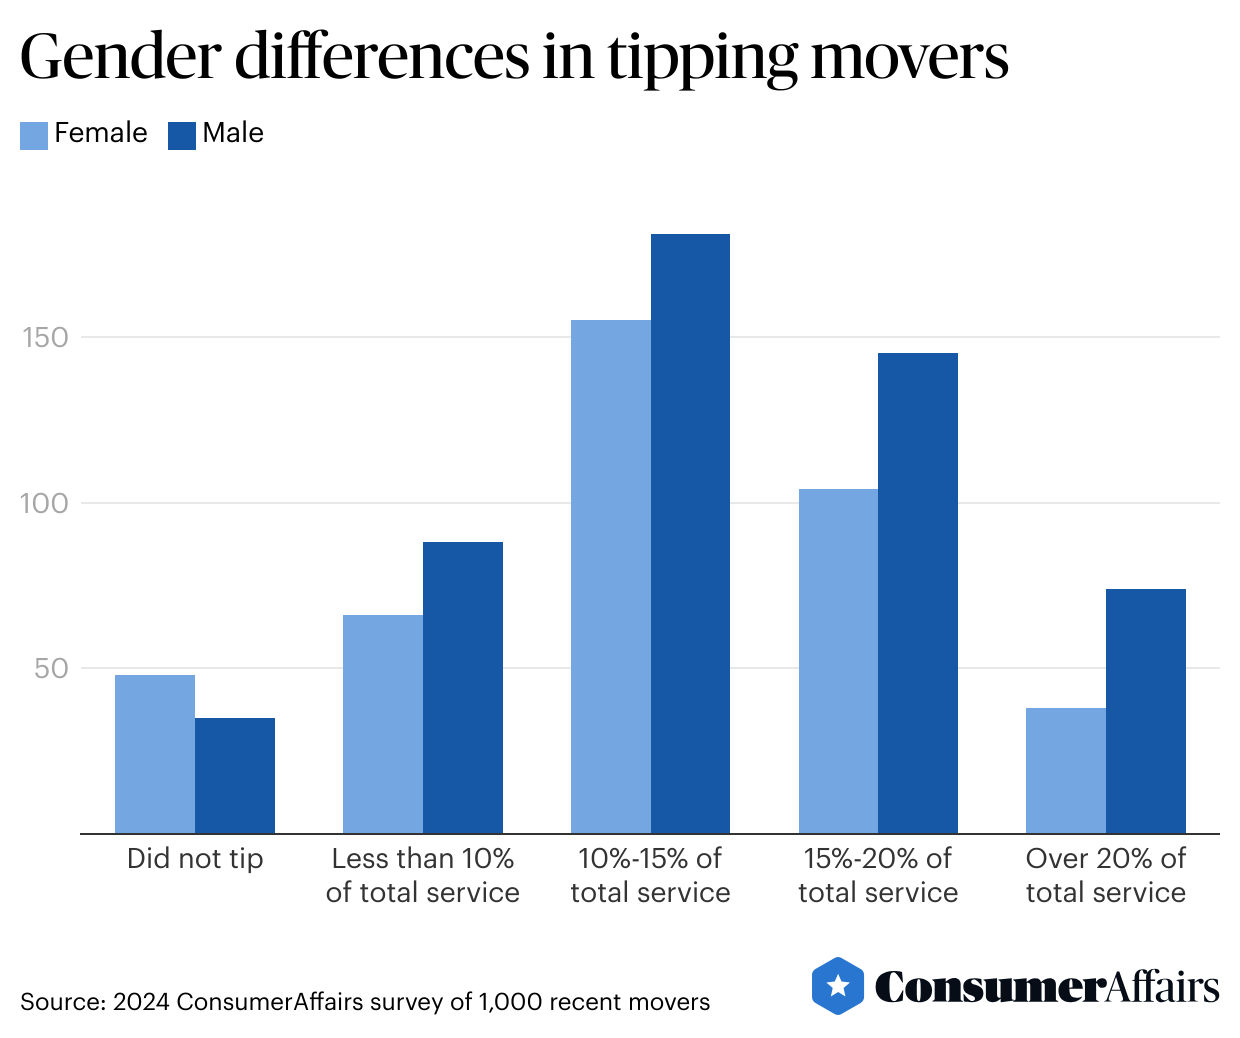 A graph showing results to "Gender differences in tipping movers".